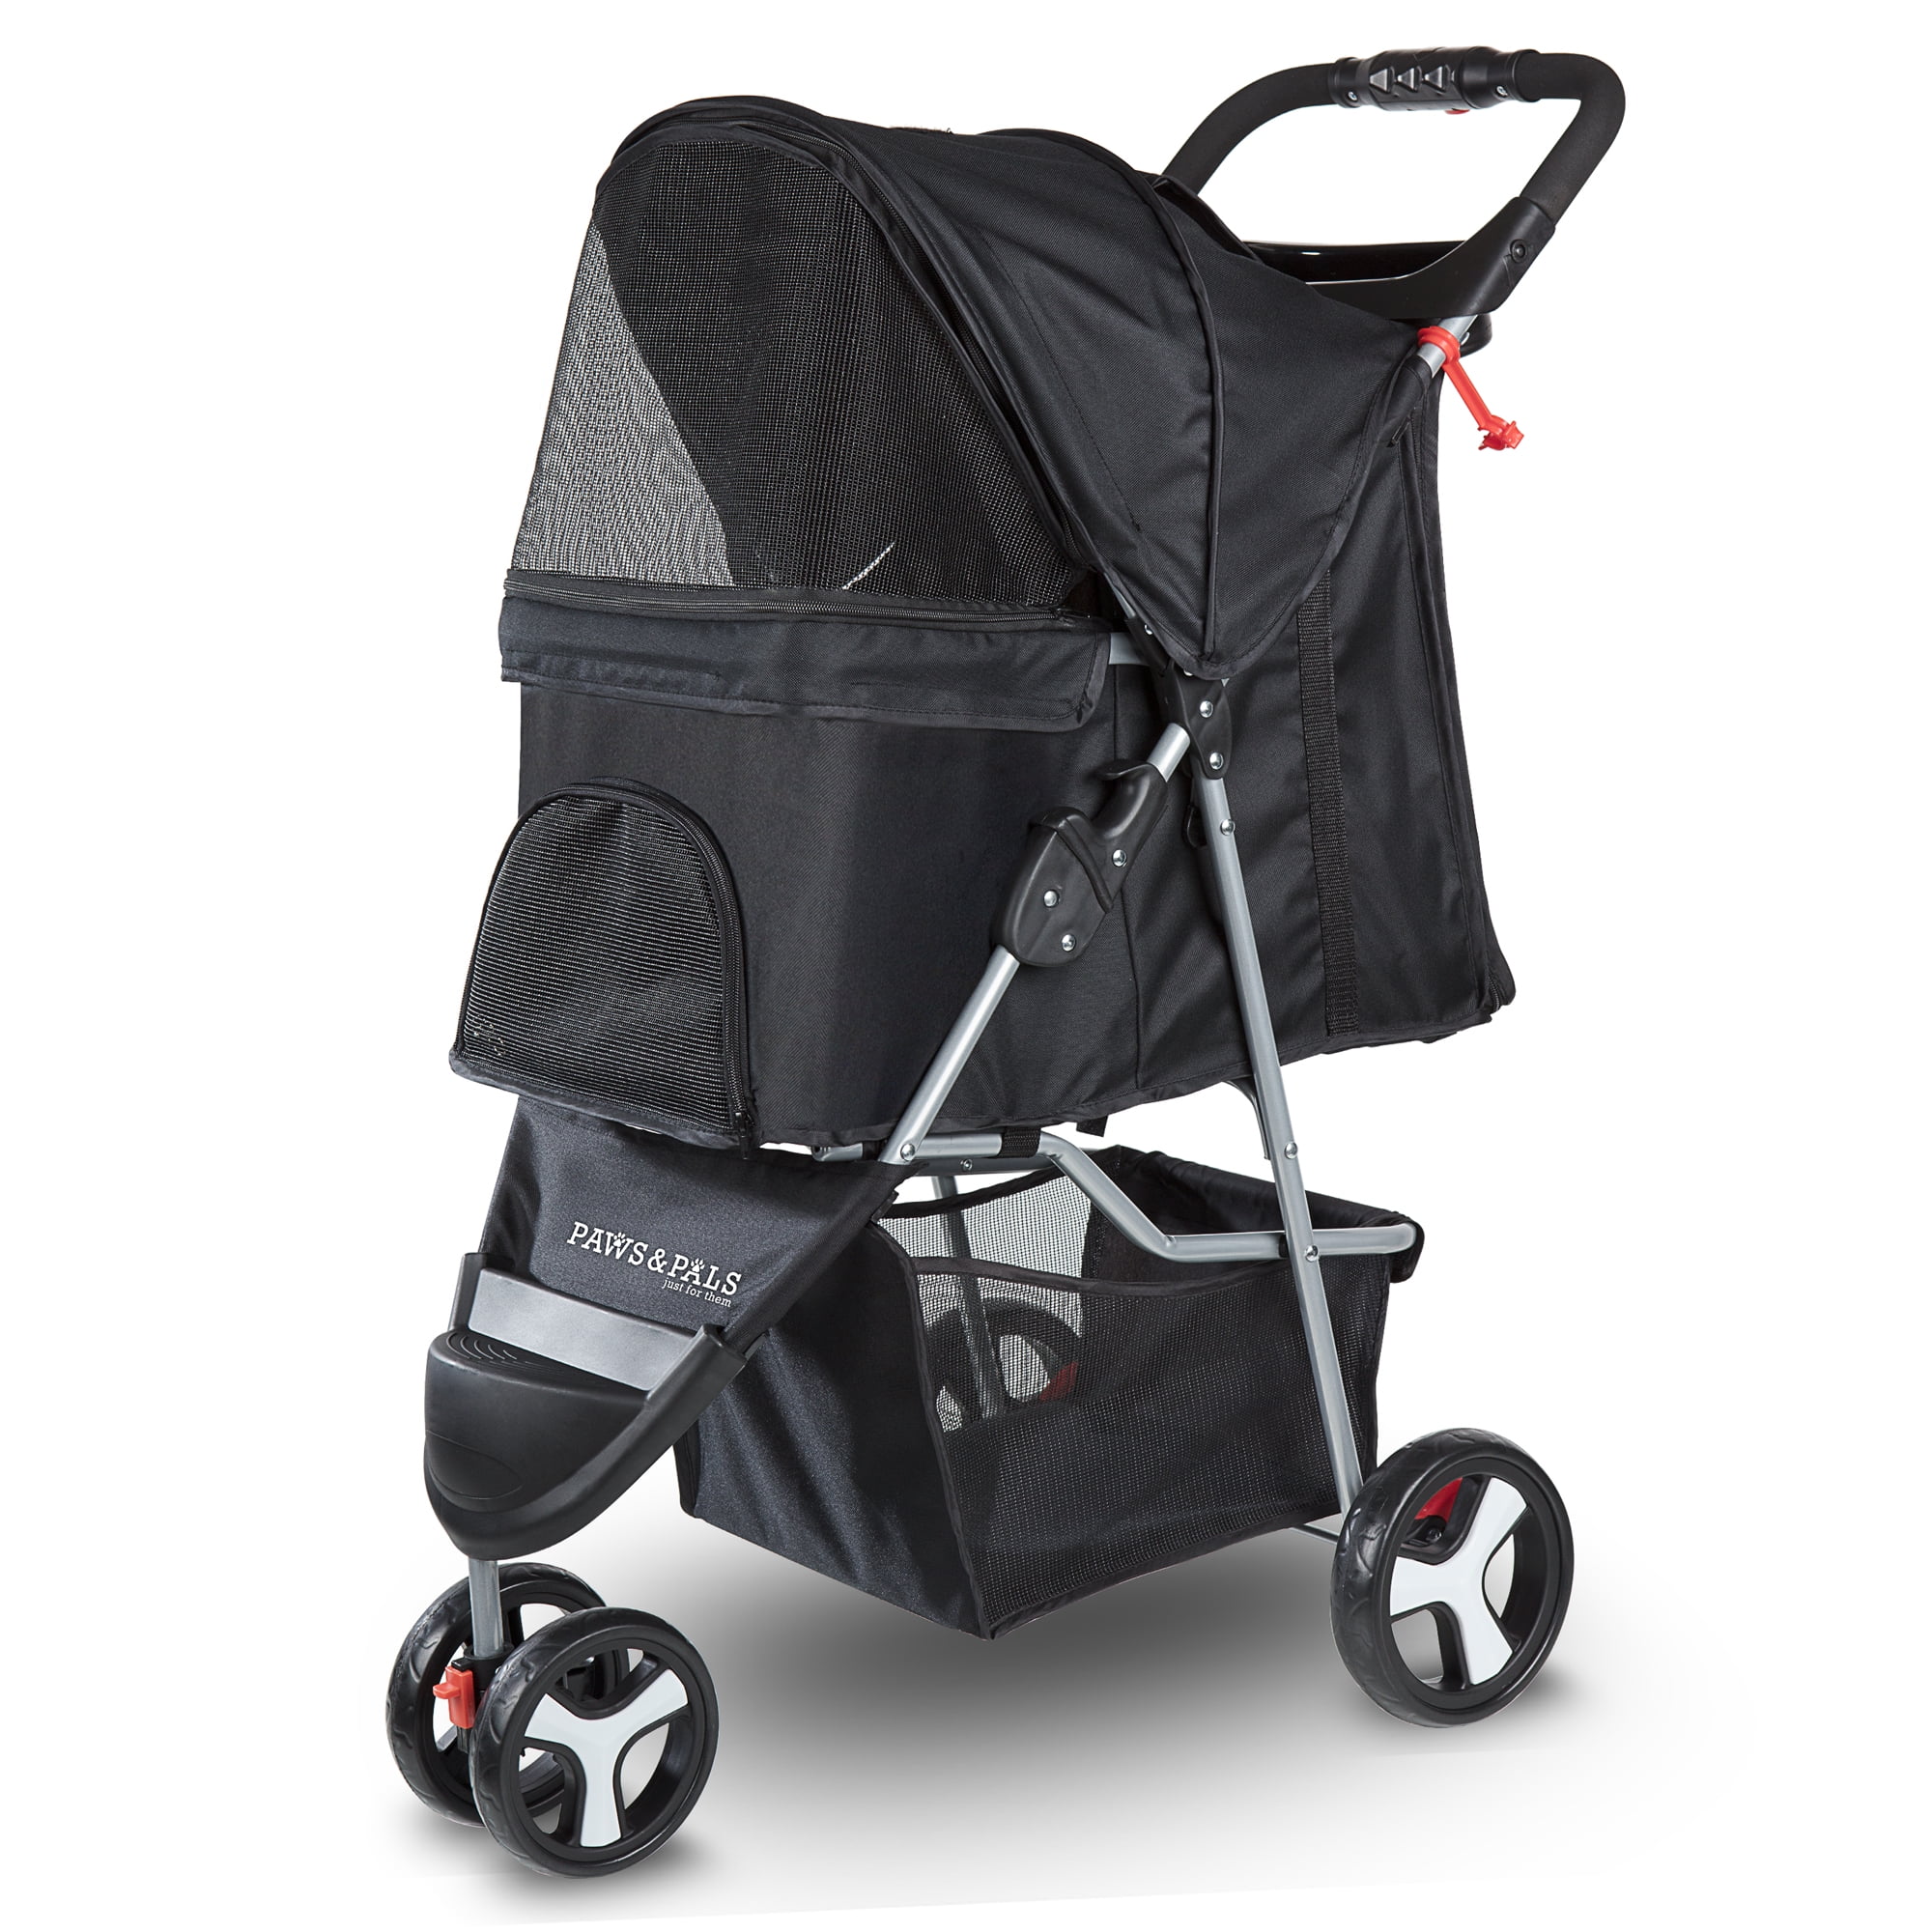 Paws & Pals Pet Stroller for Dogs and Cats - Elite Lifestyle 3-Wheel Travel  Jogger